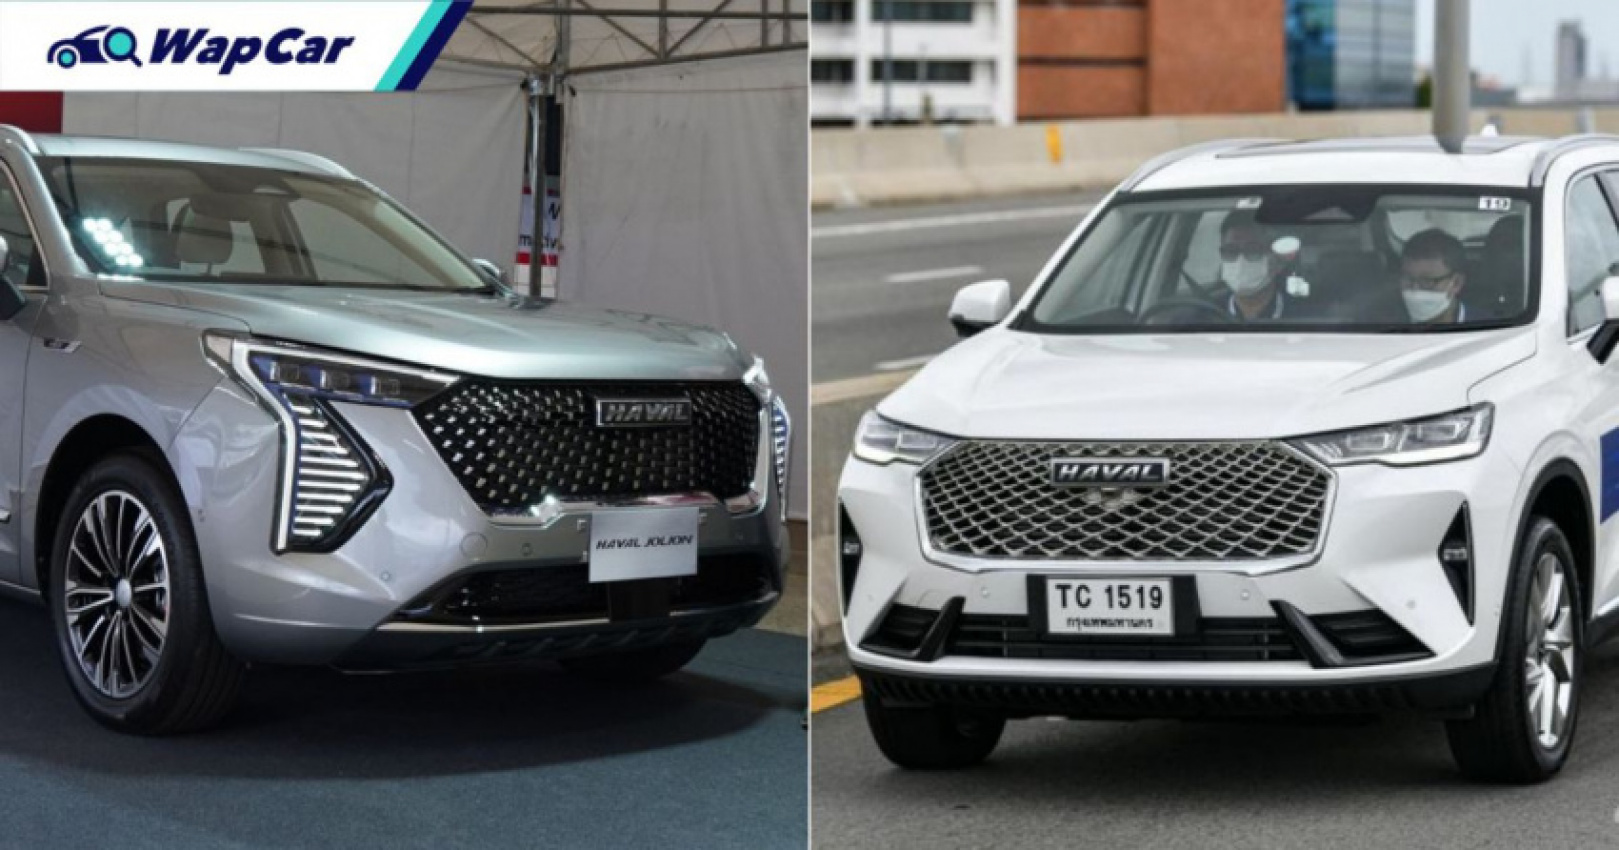 autos, cars, haval, confirmed: gwm to enter malaysia with haval h6 and jolion, 2022 to see more chinese brands